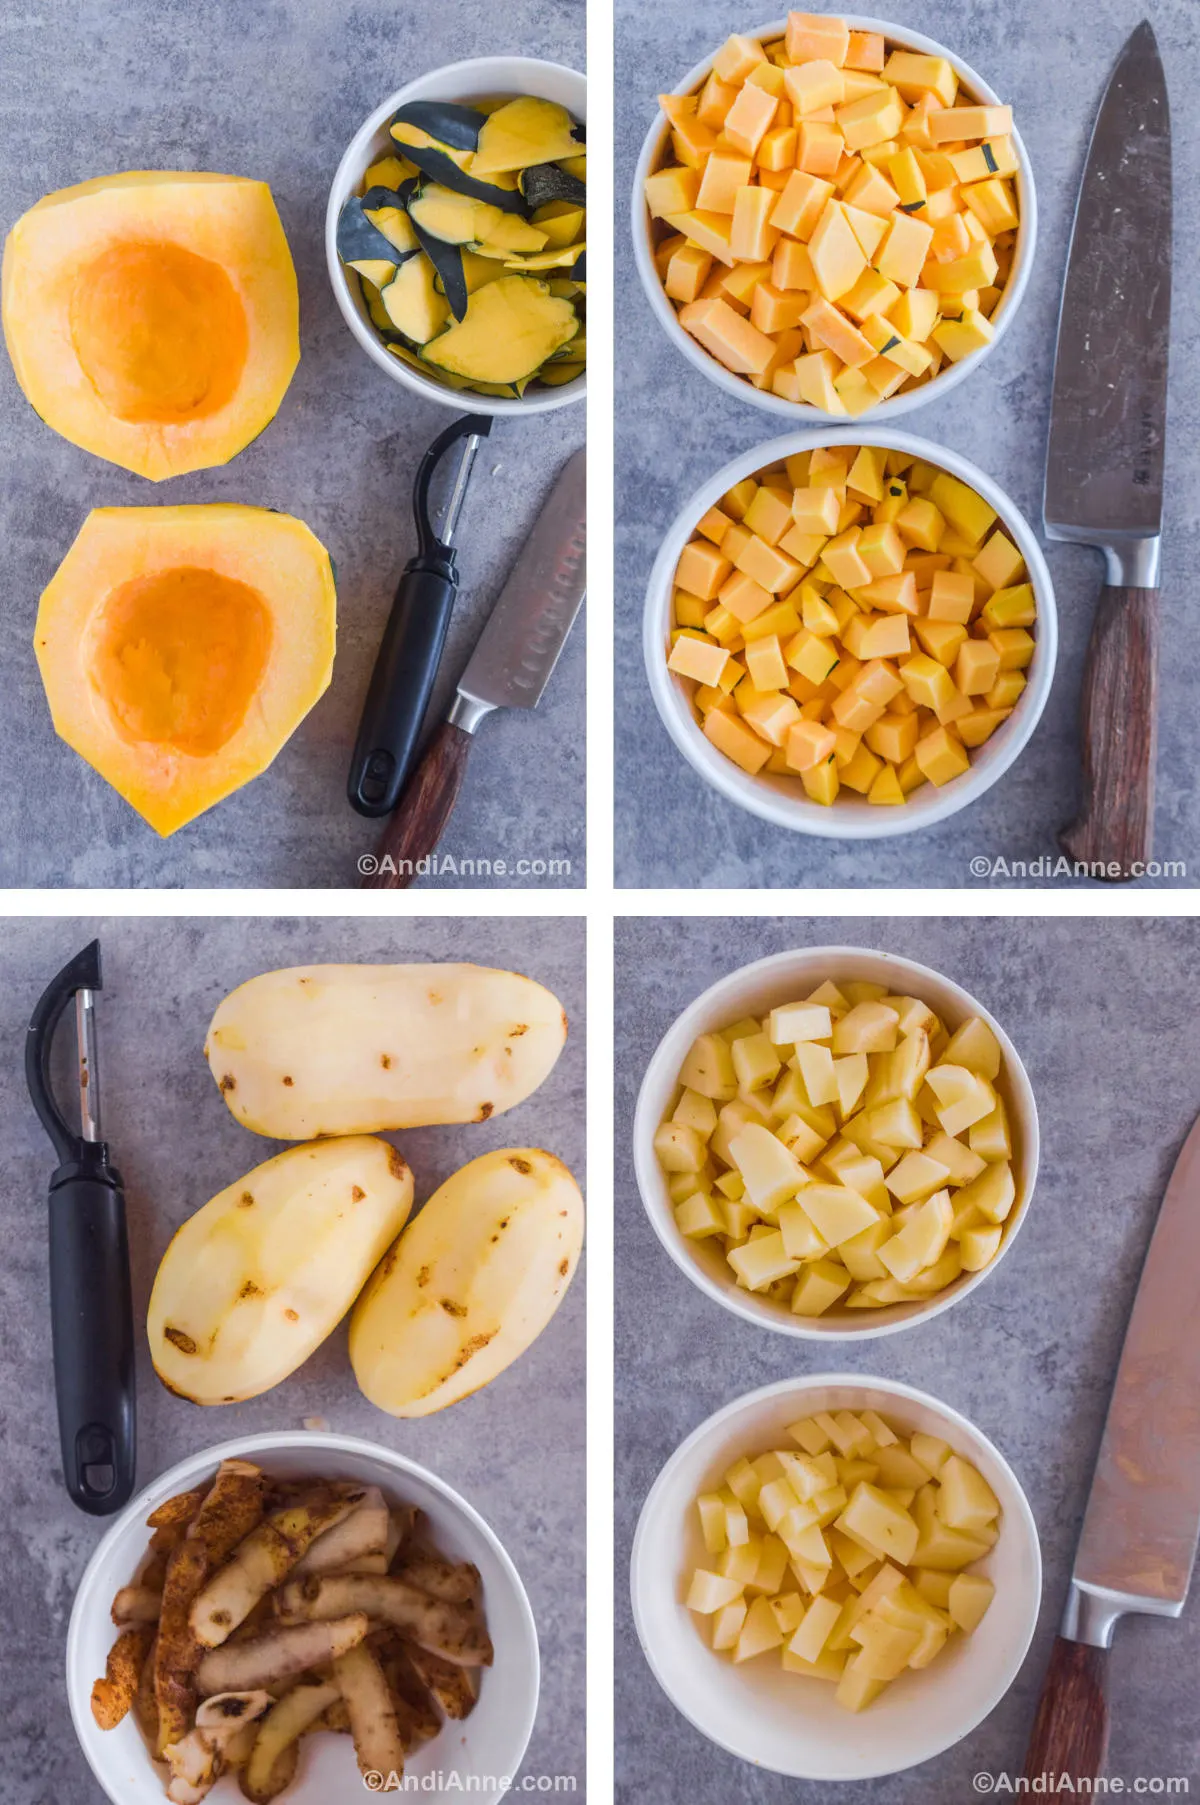 Four overhead images in one: 1. Squash peeled, halved and gutted. Peels are in a white bowl, a knife and potato peeler to the side. 2. Squash is cut into cubes and placed in two white bowls, chef knife to the side. 3. Three peeled potatoes next to a peeler and bowl with peels inside. 4. Potatoes are cut into cubes and placed in two white bowls. 